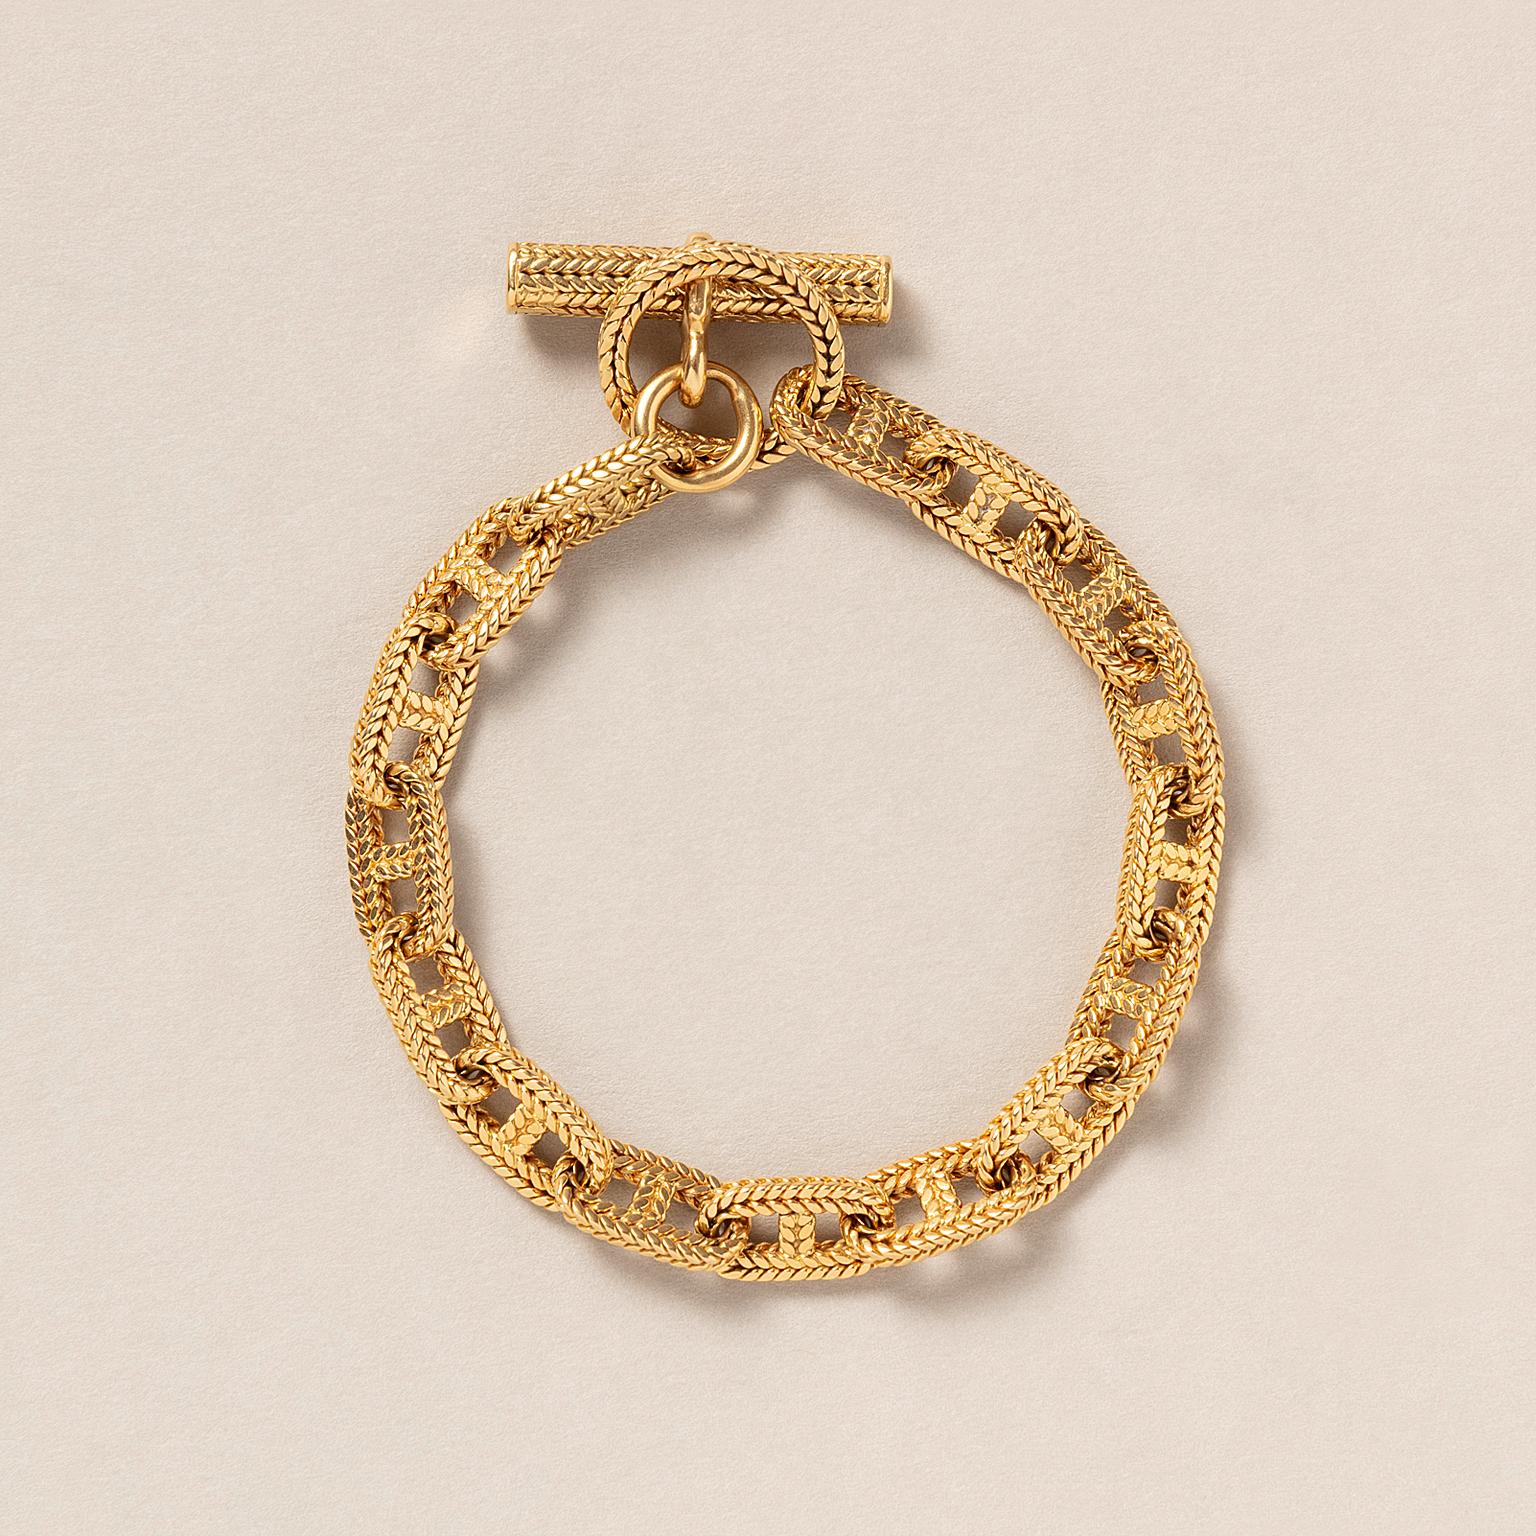 An 18-carat yellow gold Chaîne d'Ancre Tressée bracelet with 14 woven square links. With a toggle and a bar clasp of the same structure, signed and numbered: Hermès Paris, 54981, circa 1970.

weight: 34.75 g
length: 20 cm fits a small to medium wrist